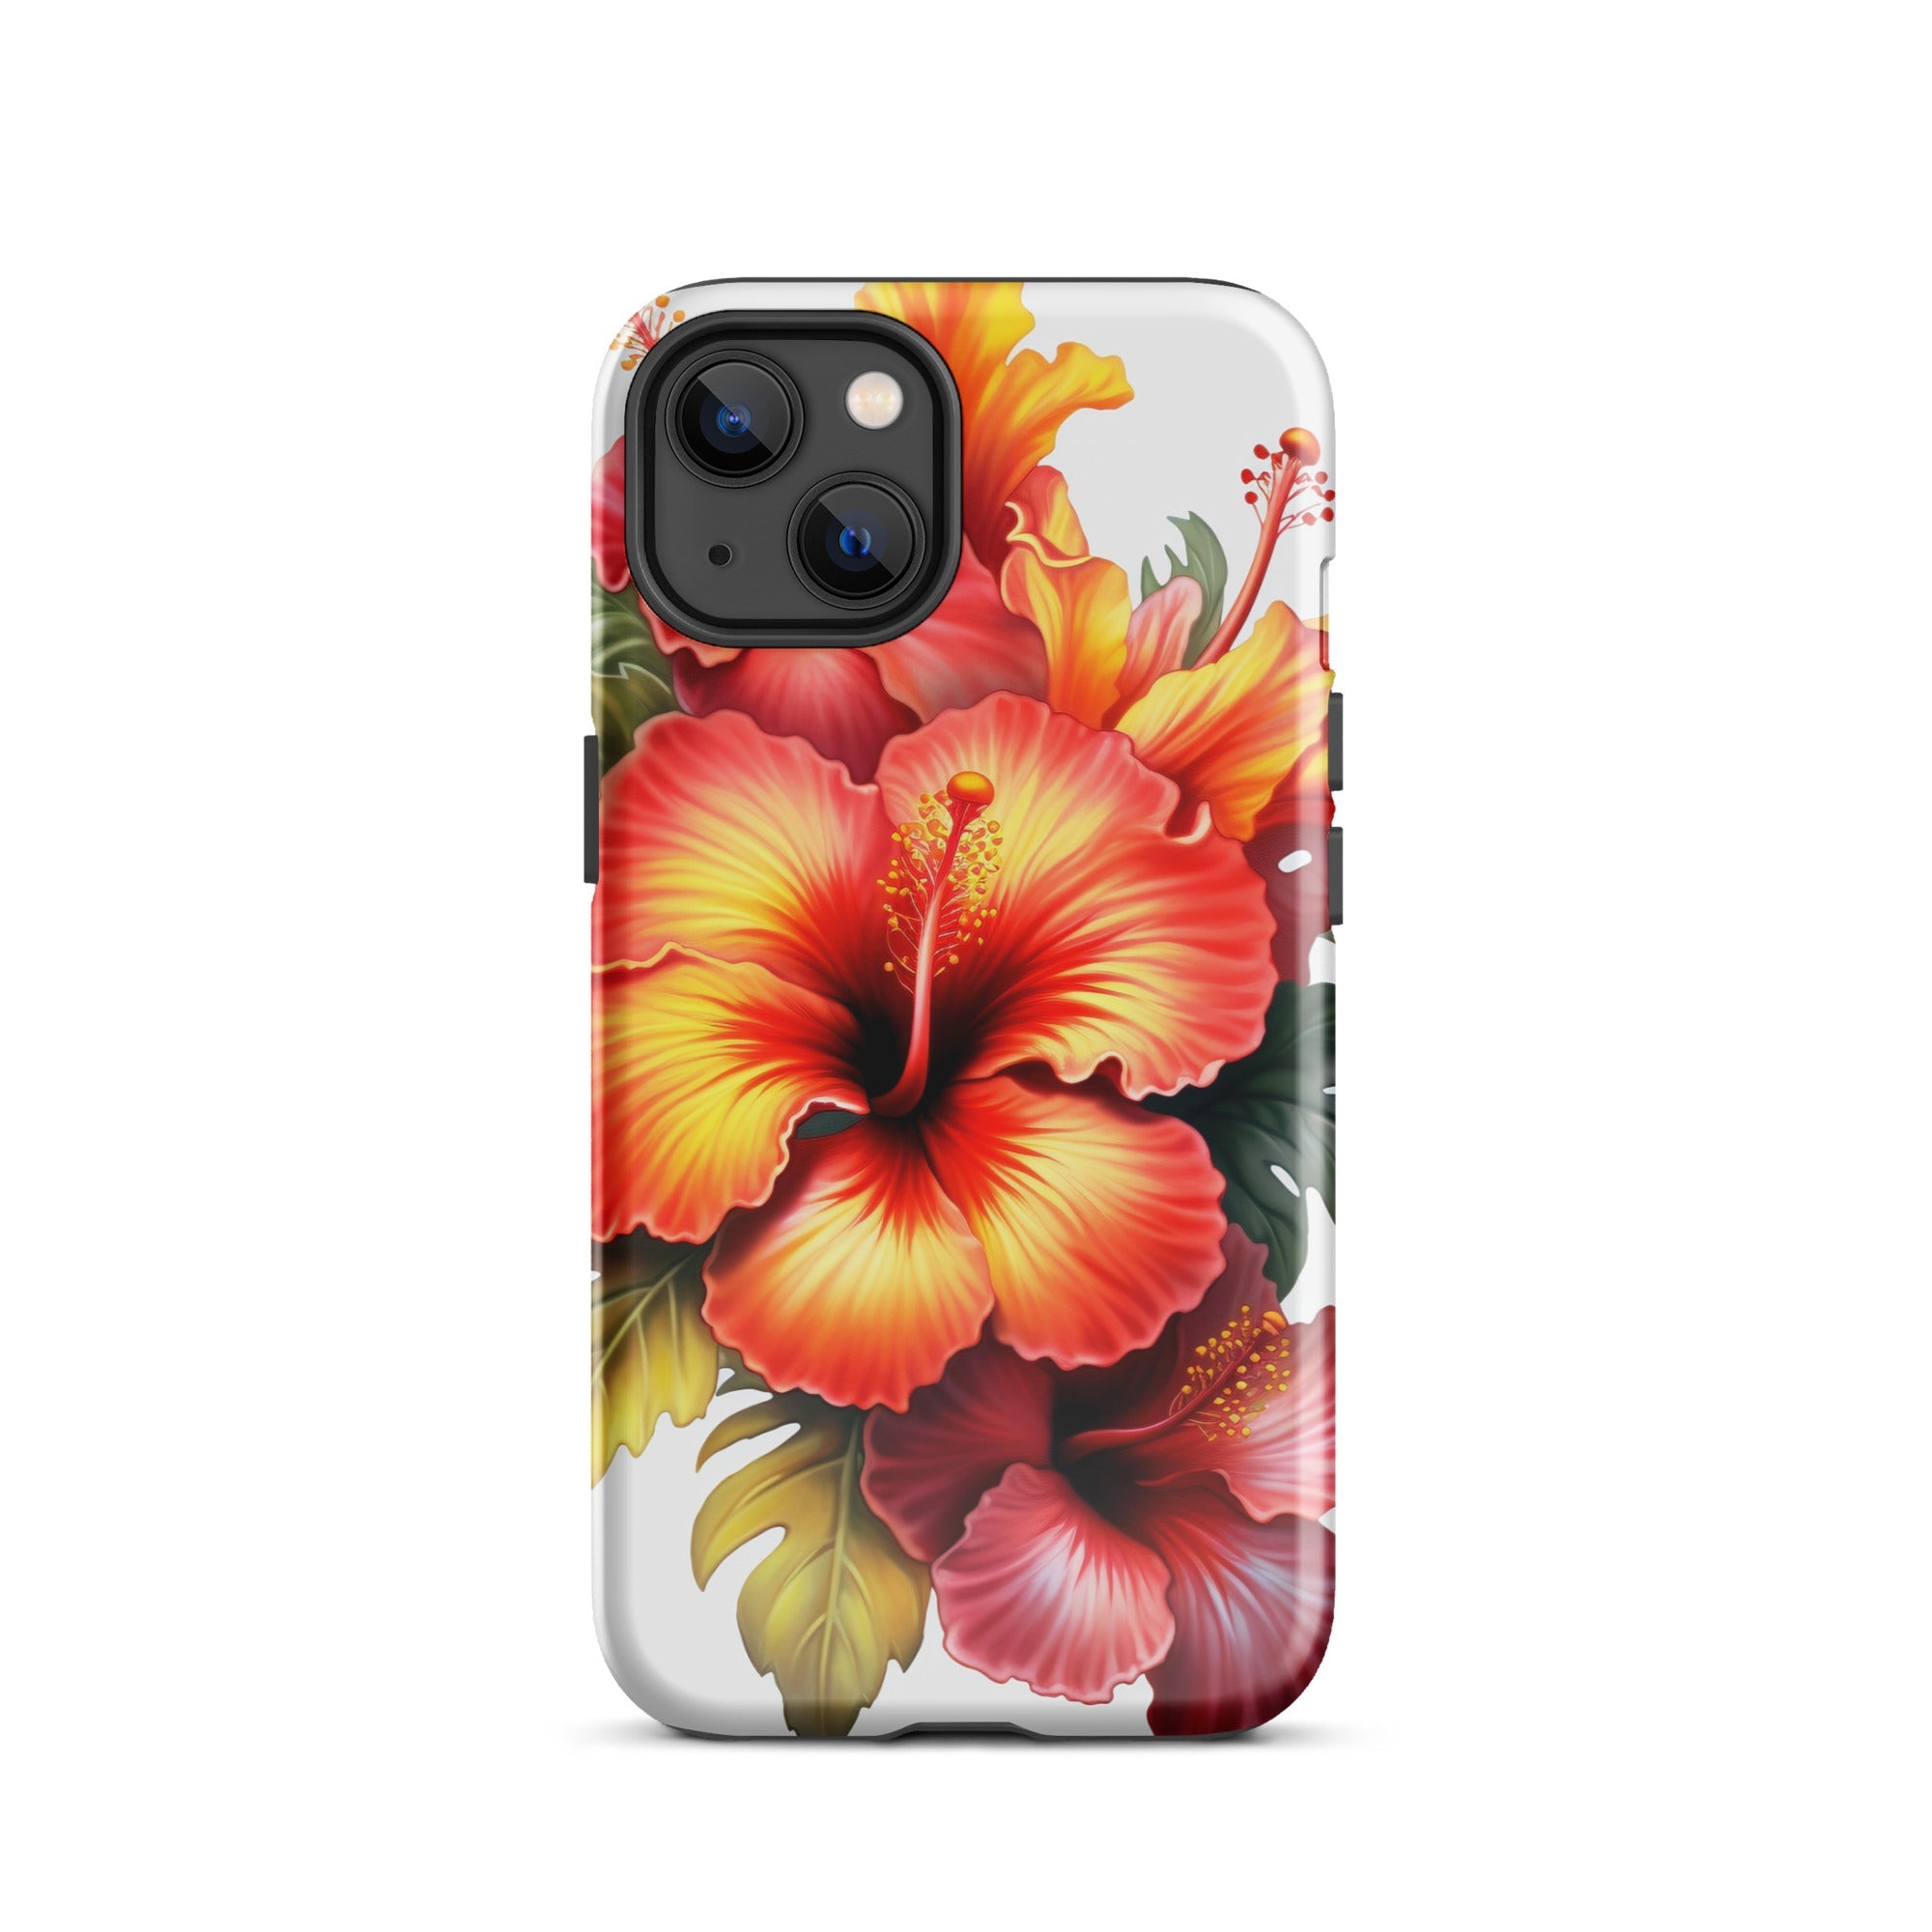 Hibiscus Flower iPhone Case by Visual Verse - Image 17